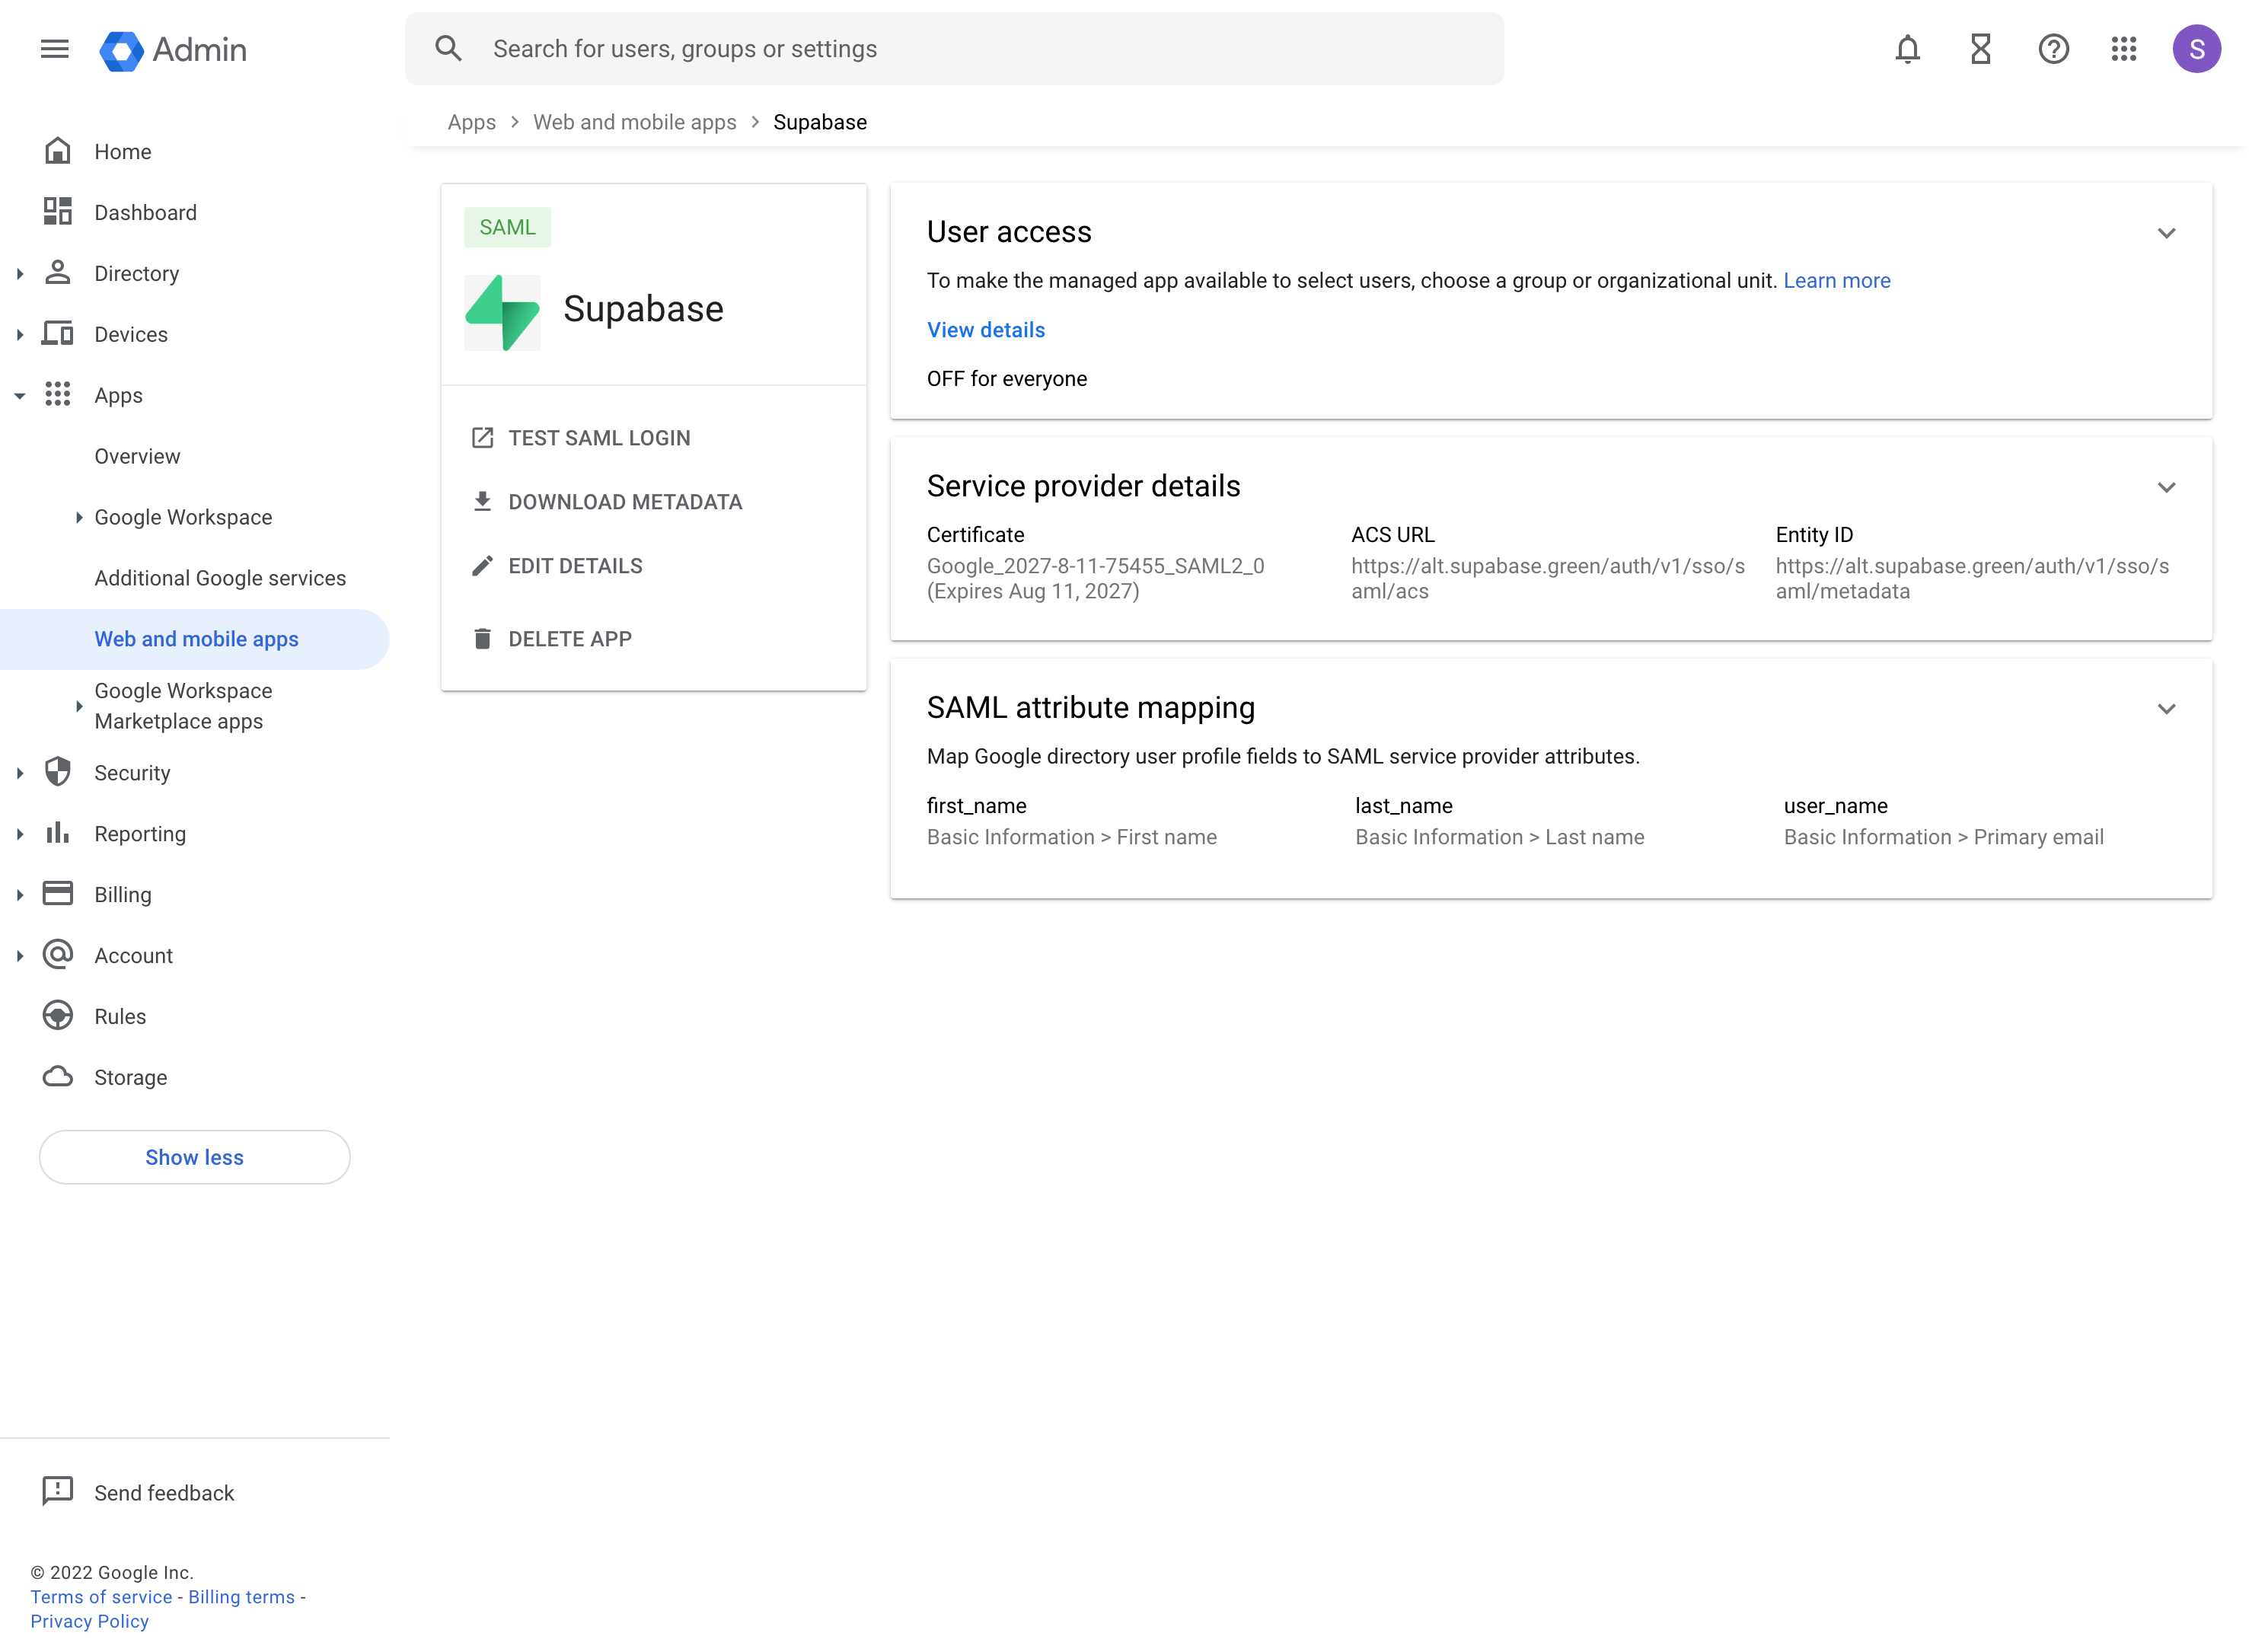 Google Workspace: Web and mobile apps admin console, Supabase app screen